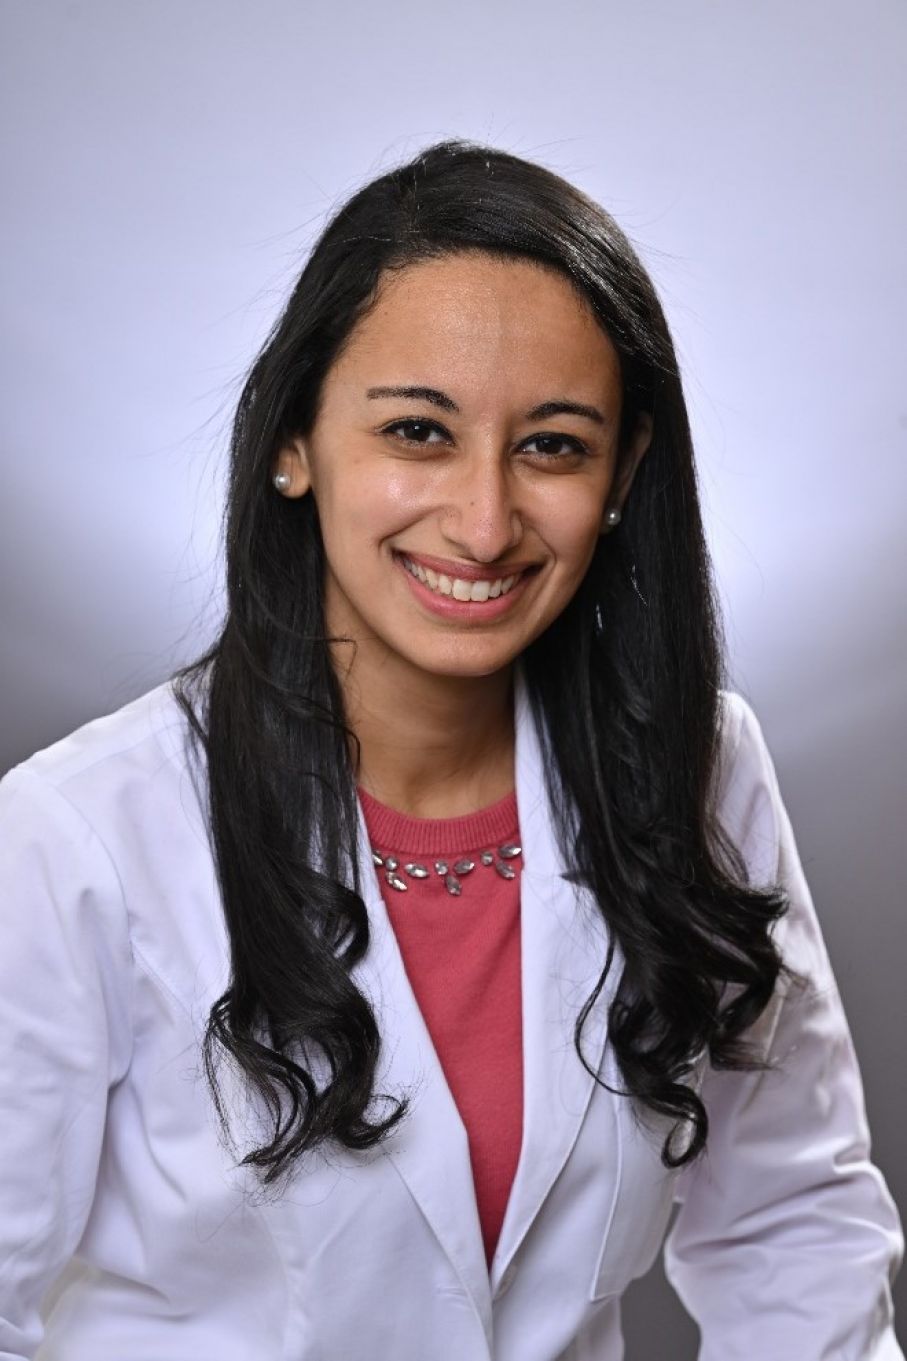 St. Joseph’s Health Welcomes Veronica Chehata, MD, Spinal Cord Injury Specialist